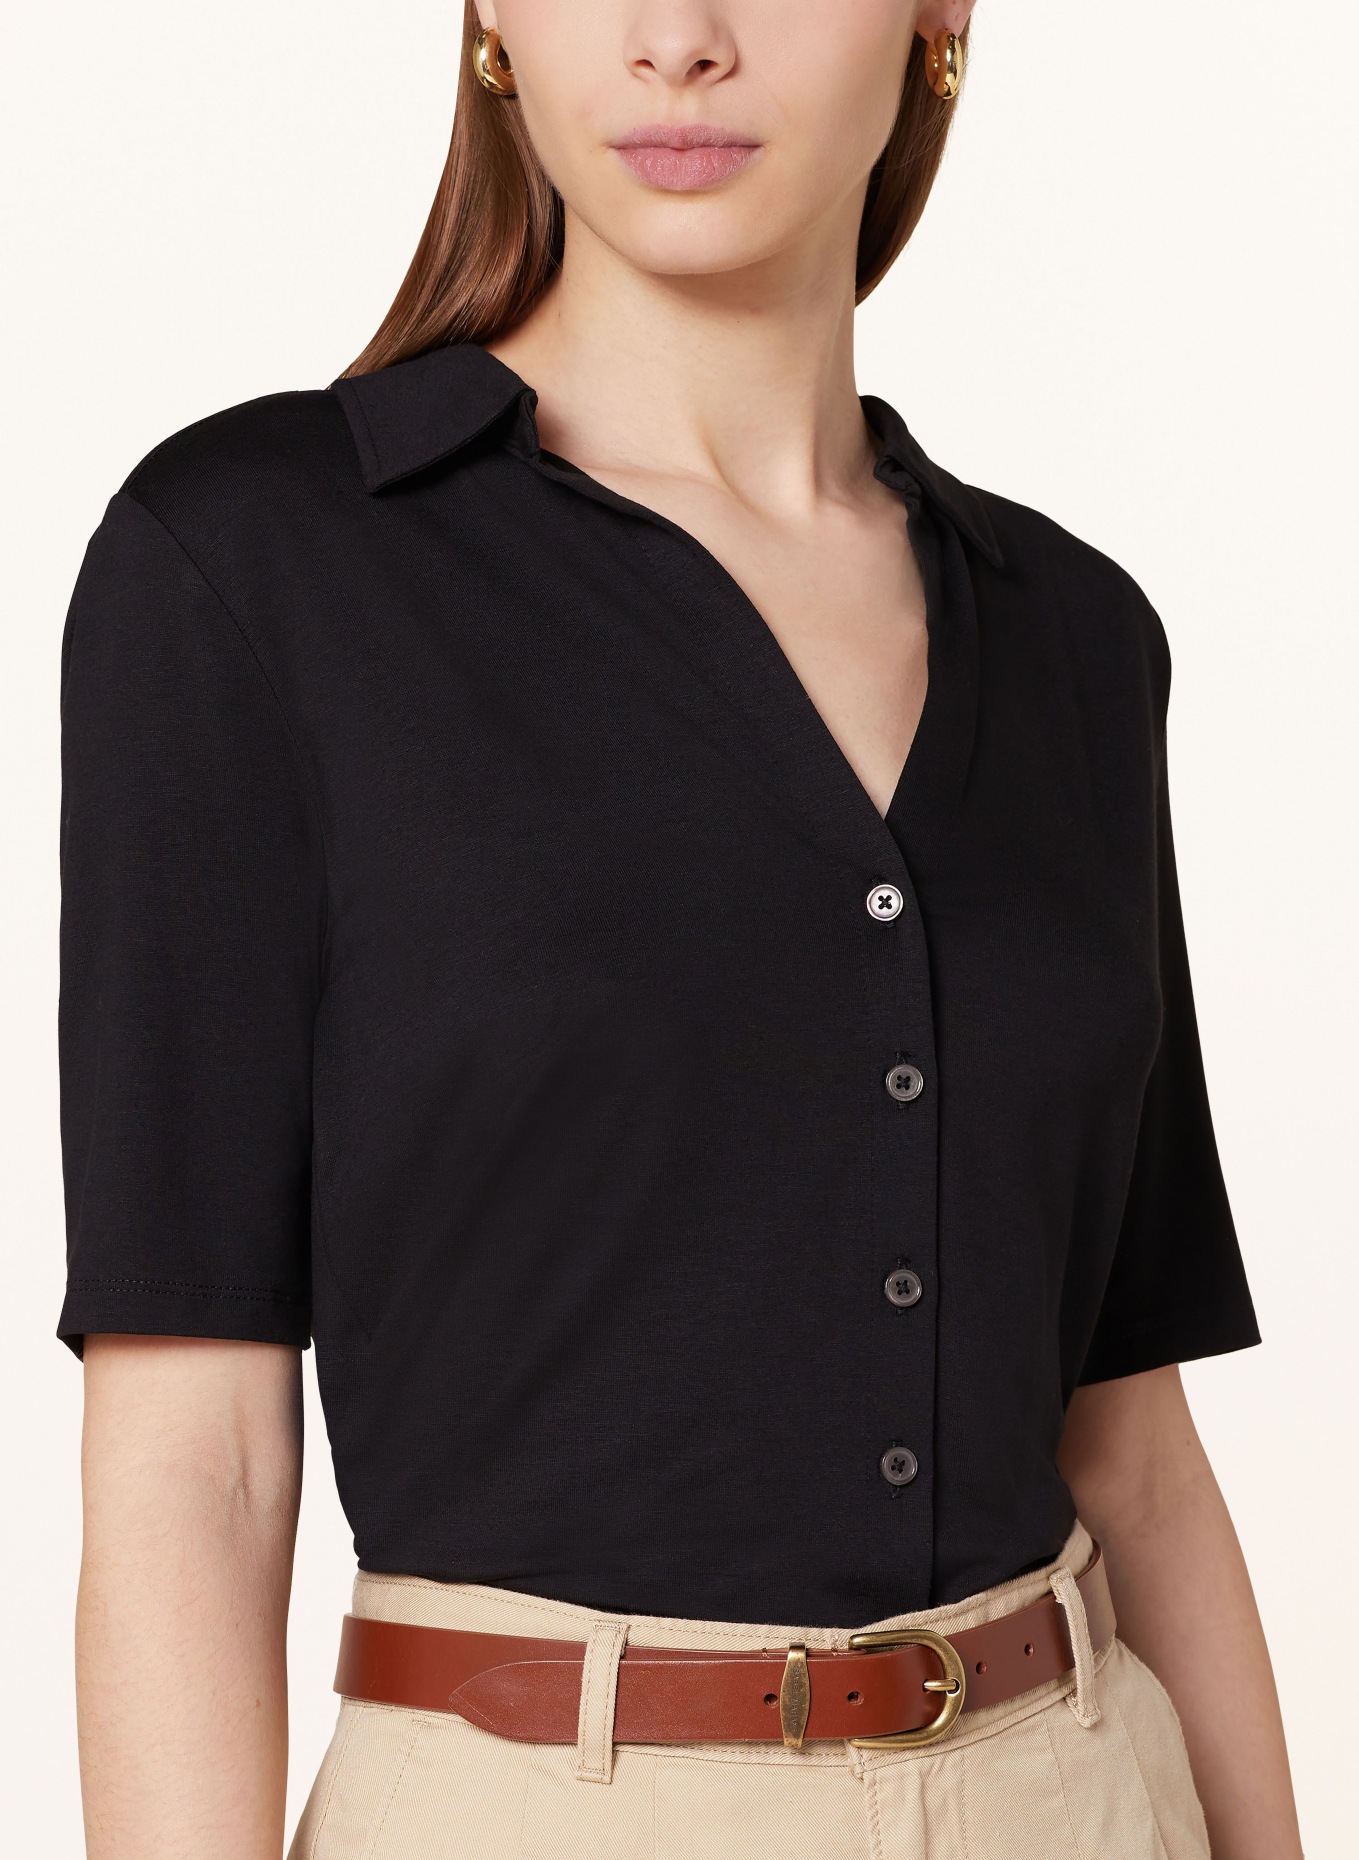 Marc O'Polo Shirt blouse made of jersey, Color: BLACK (Image 4)